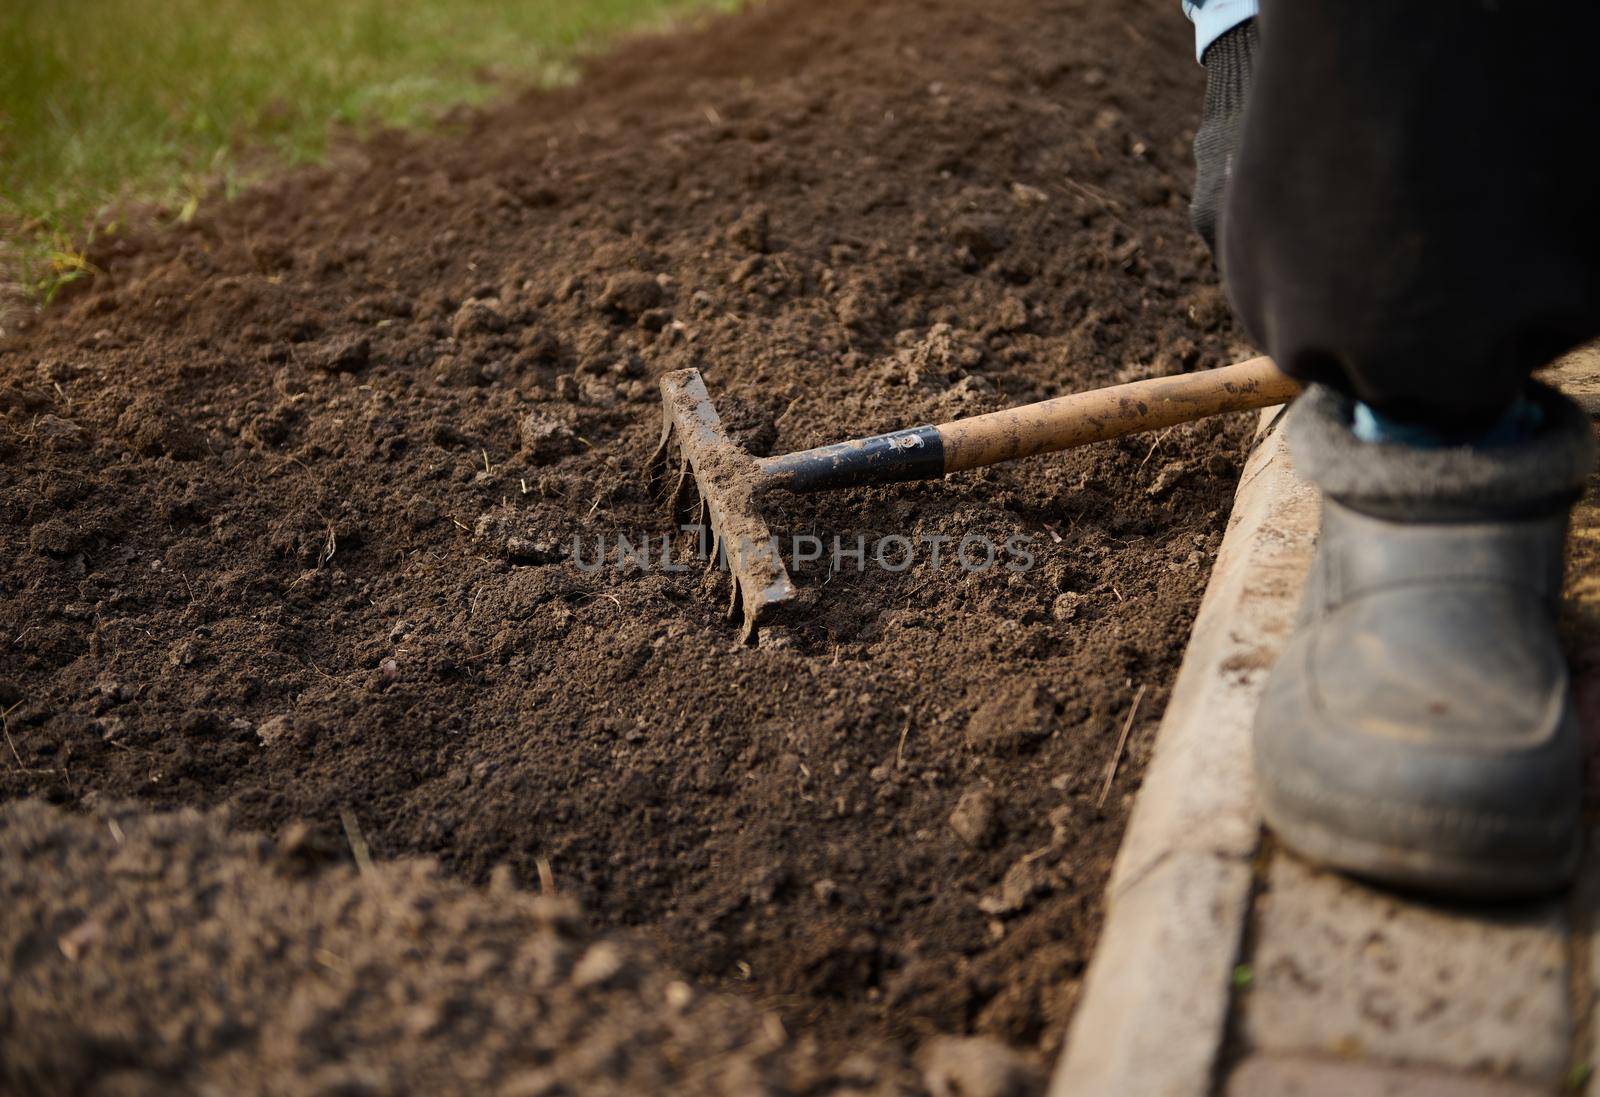 Focus on soiled rakes lying on loosened soil prepared for seedlings and sowing on an early spring day. Horticulture, agriculture, gardening, house and garden concept